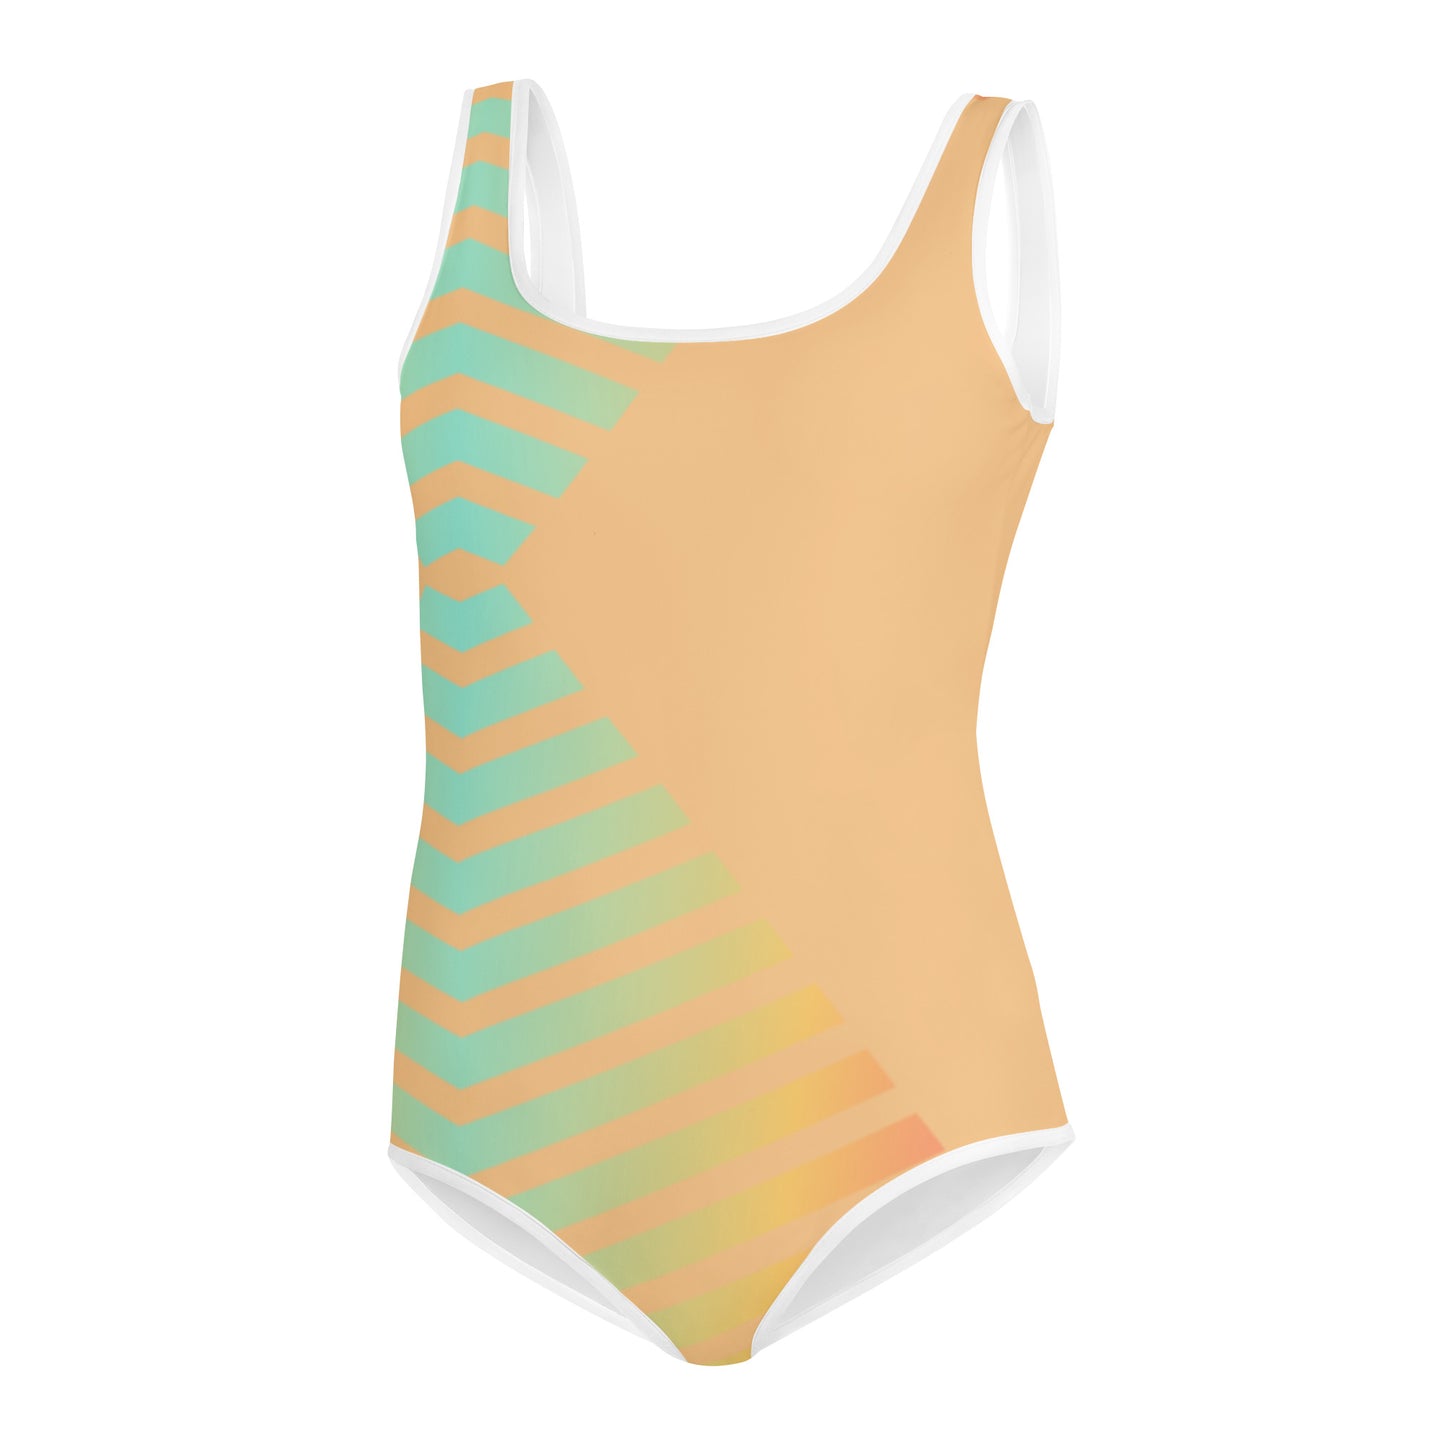 Peachy Vibe Youth Swimsuit